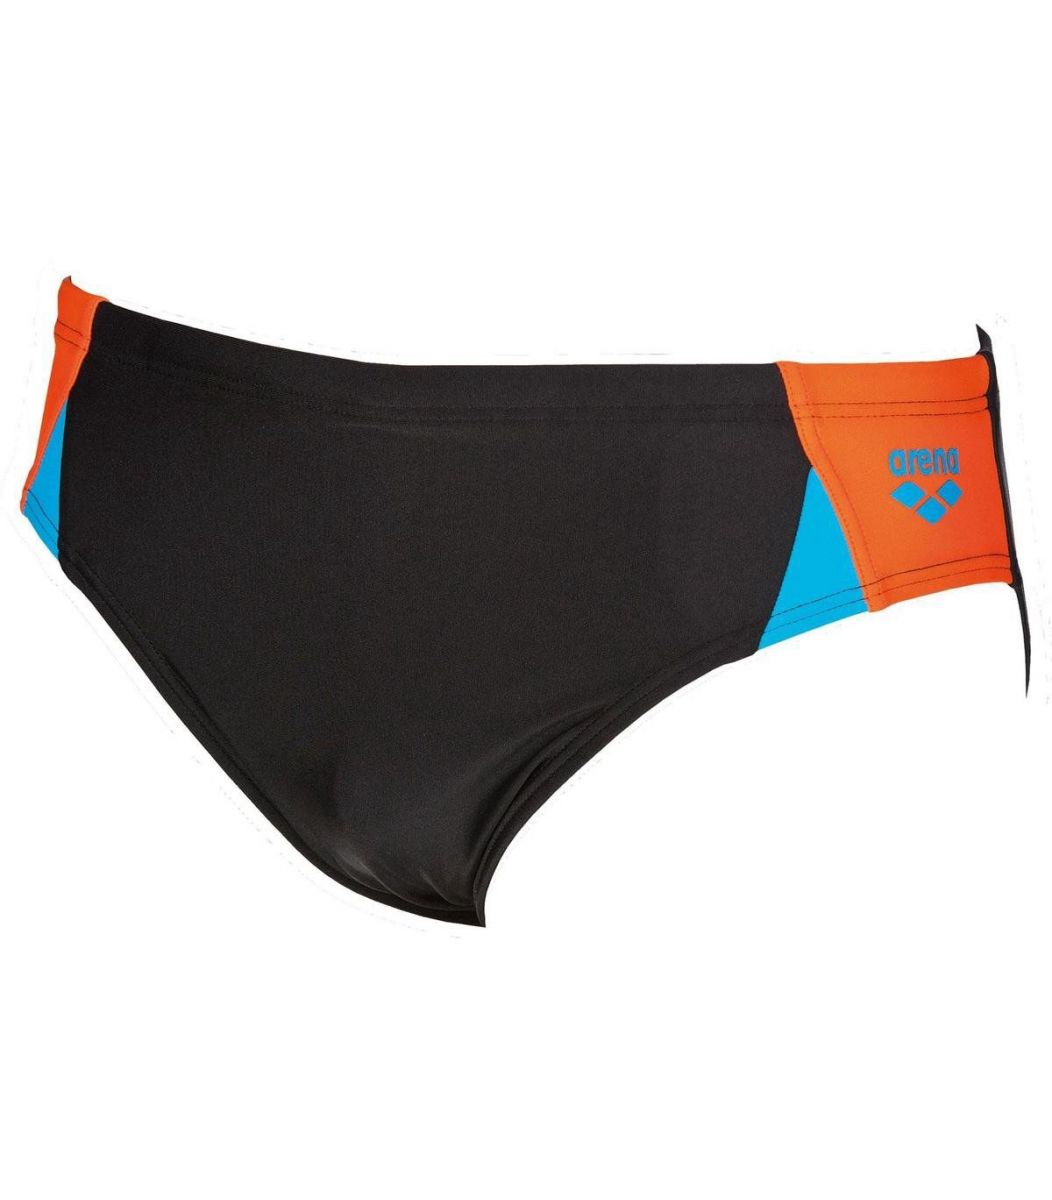  Stretch - on the skin Arena Arena M Drom Brief 2A51253-1